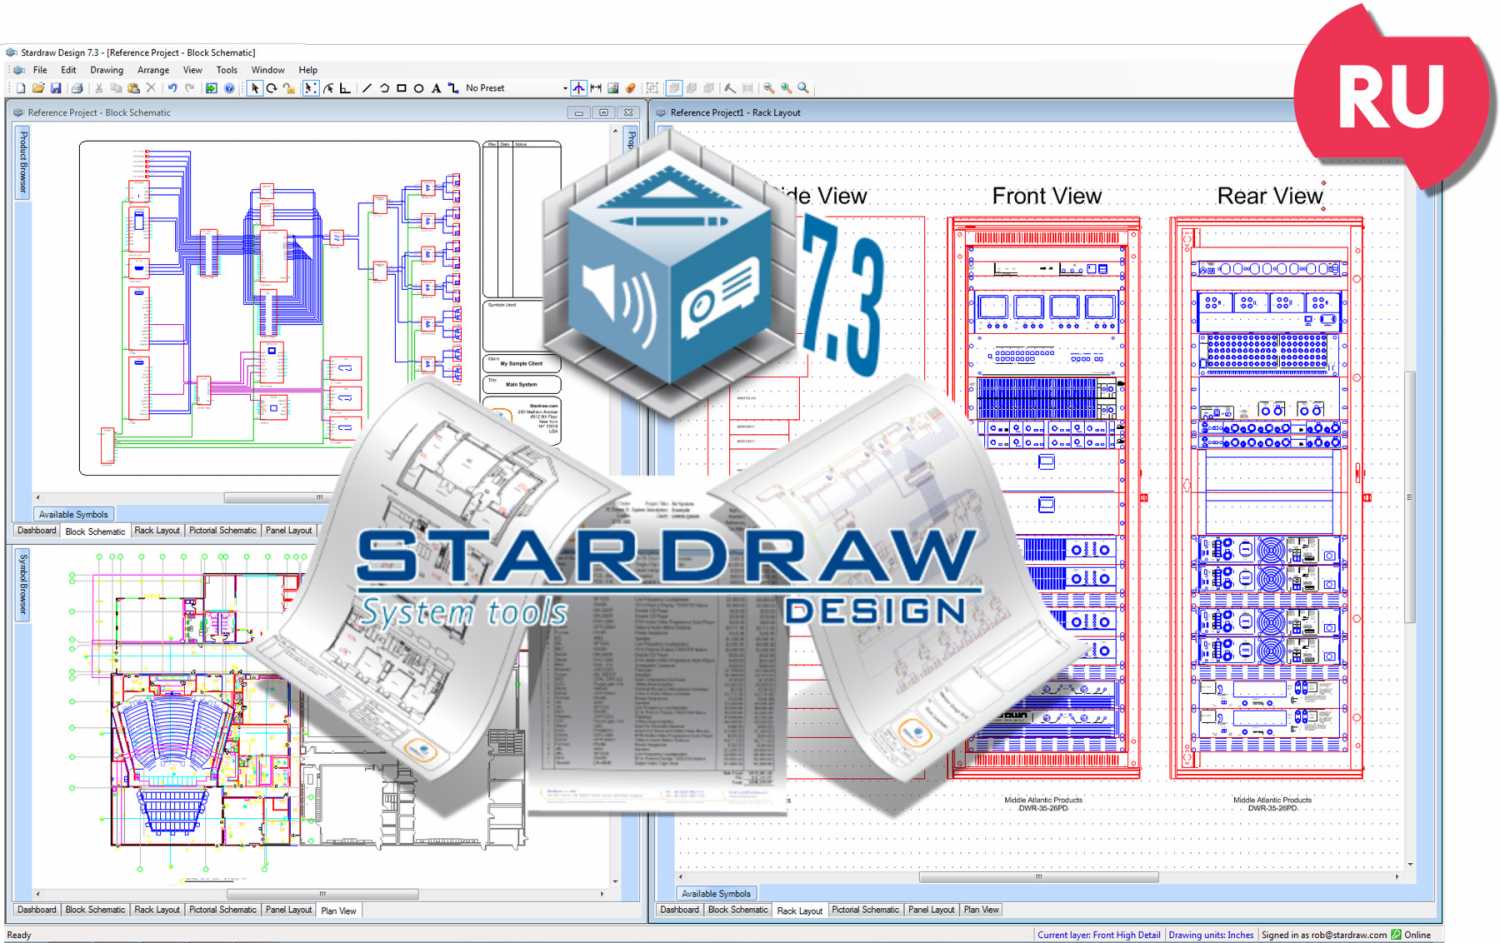 The Introduction to Stardraw Design 7.3 webinar has been approved by AVIXA